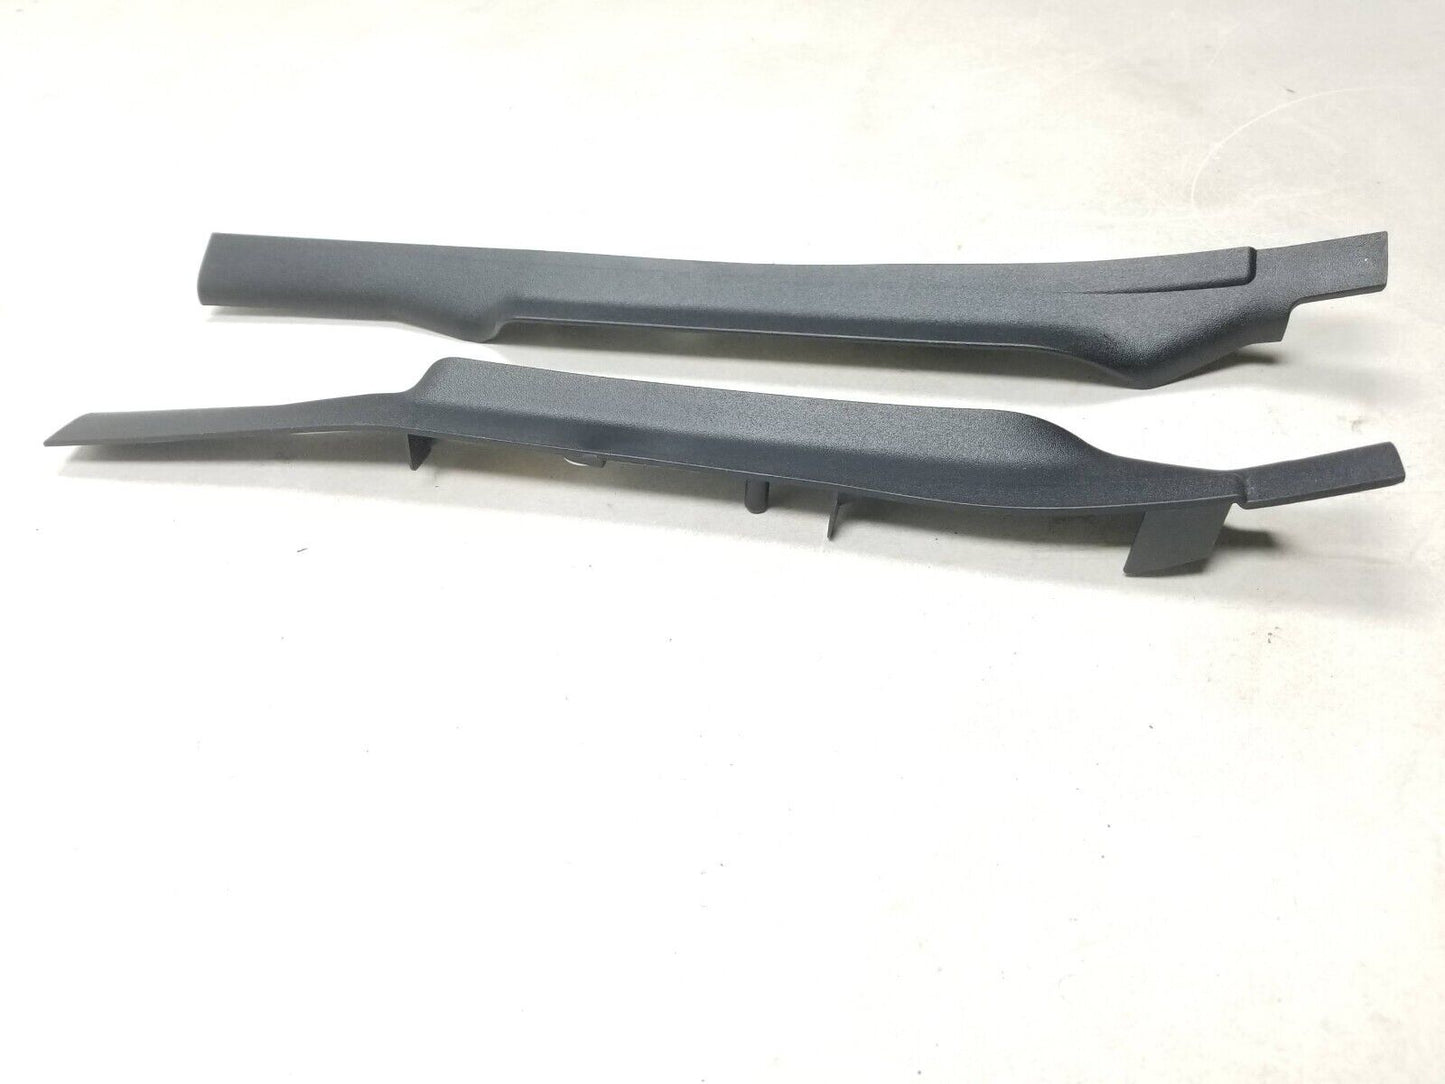 06 07 08 09 Range Rover Sport Front A Pillar Middle Cover Trim Left & Right OEM